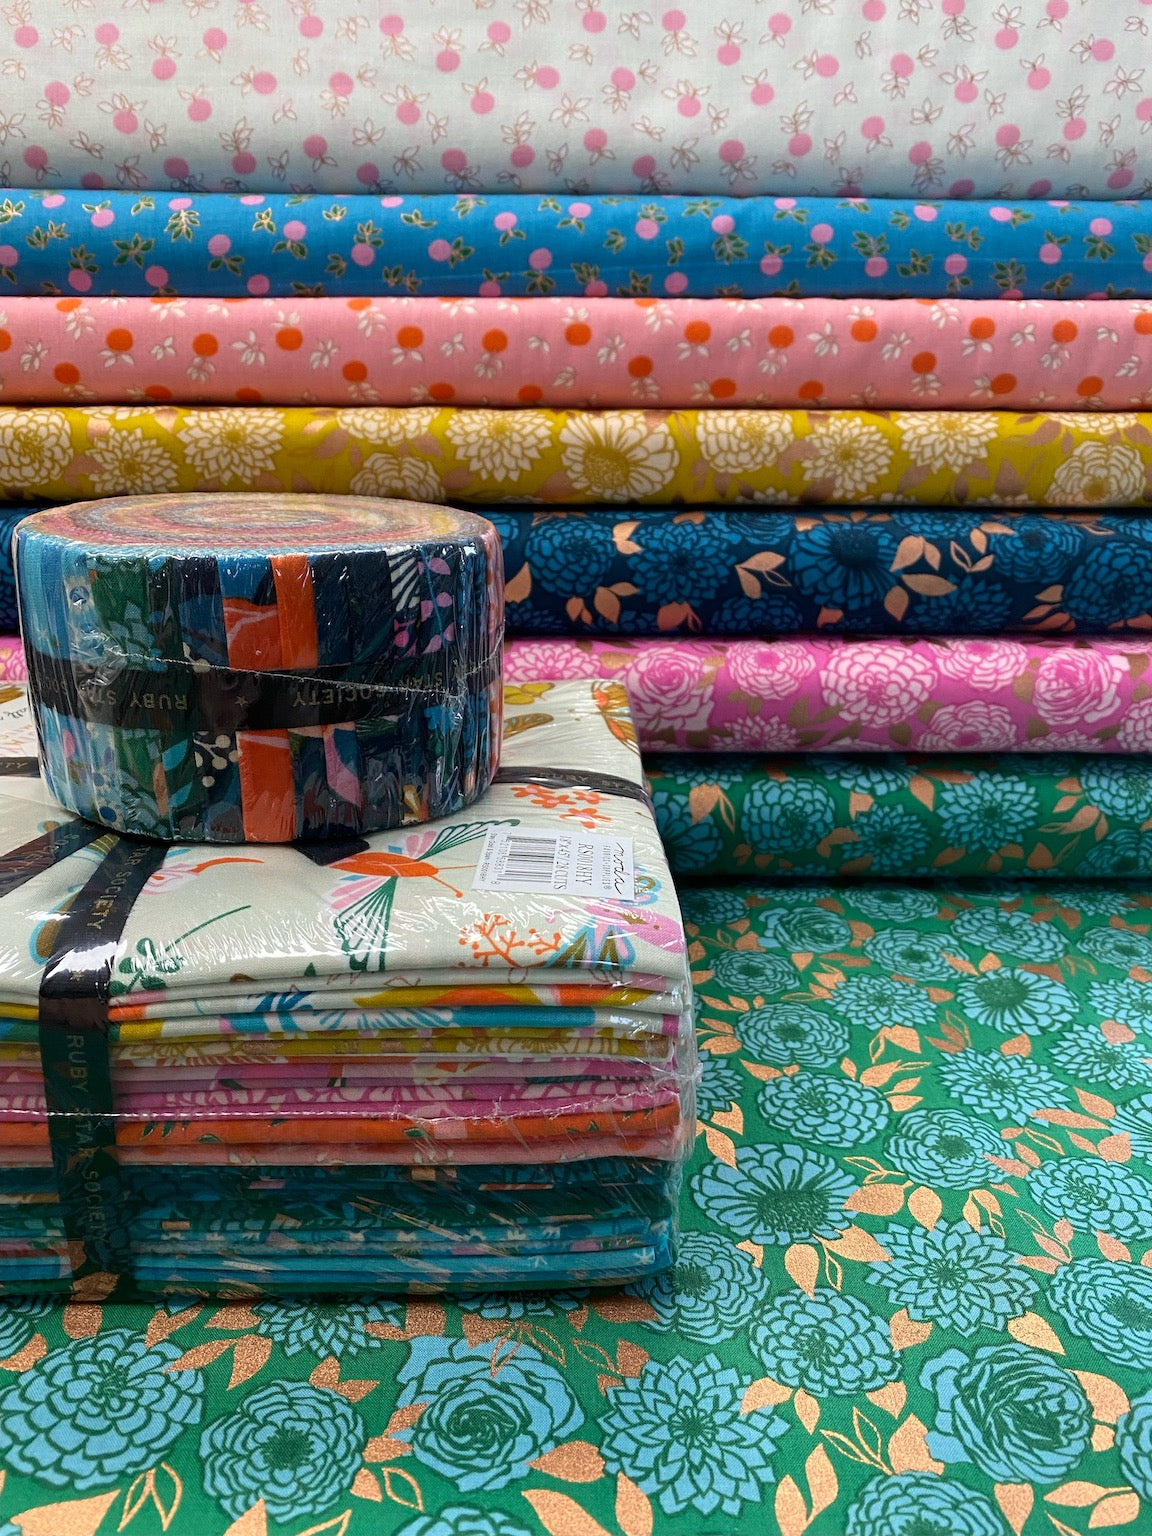 Stay Gold by Melody Miller of Ruby Star Society Half Yard Bundle of 28 Prints   RS0018HY Cotton Woven